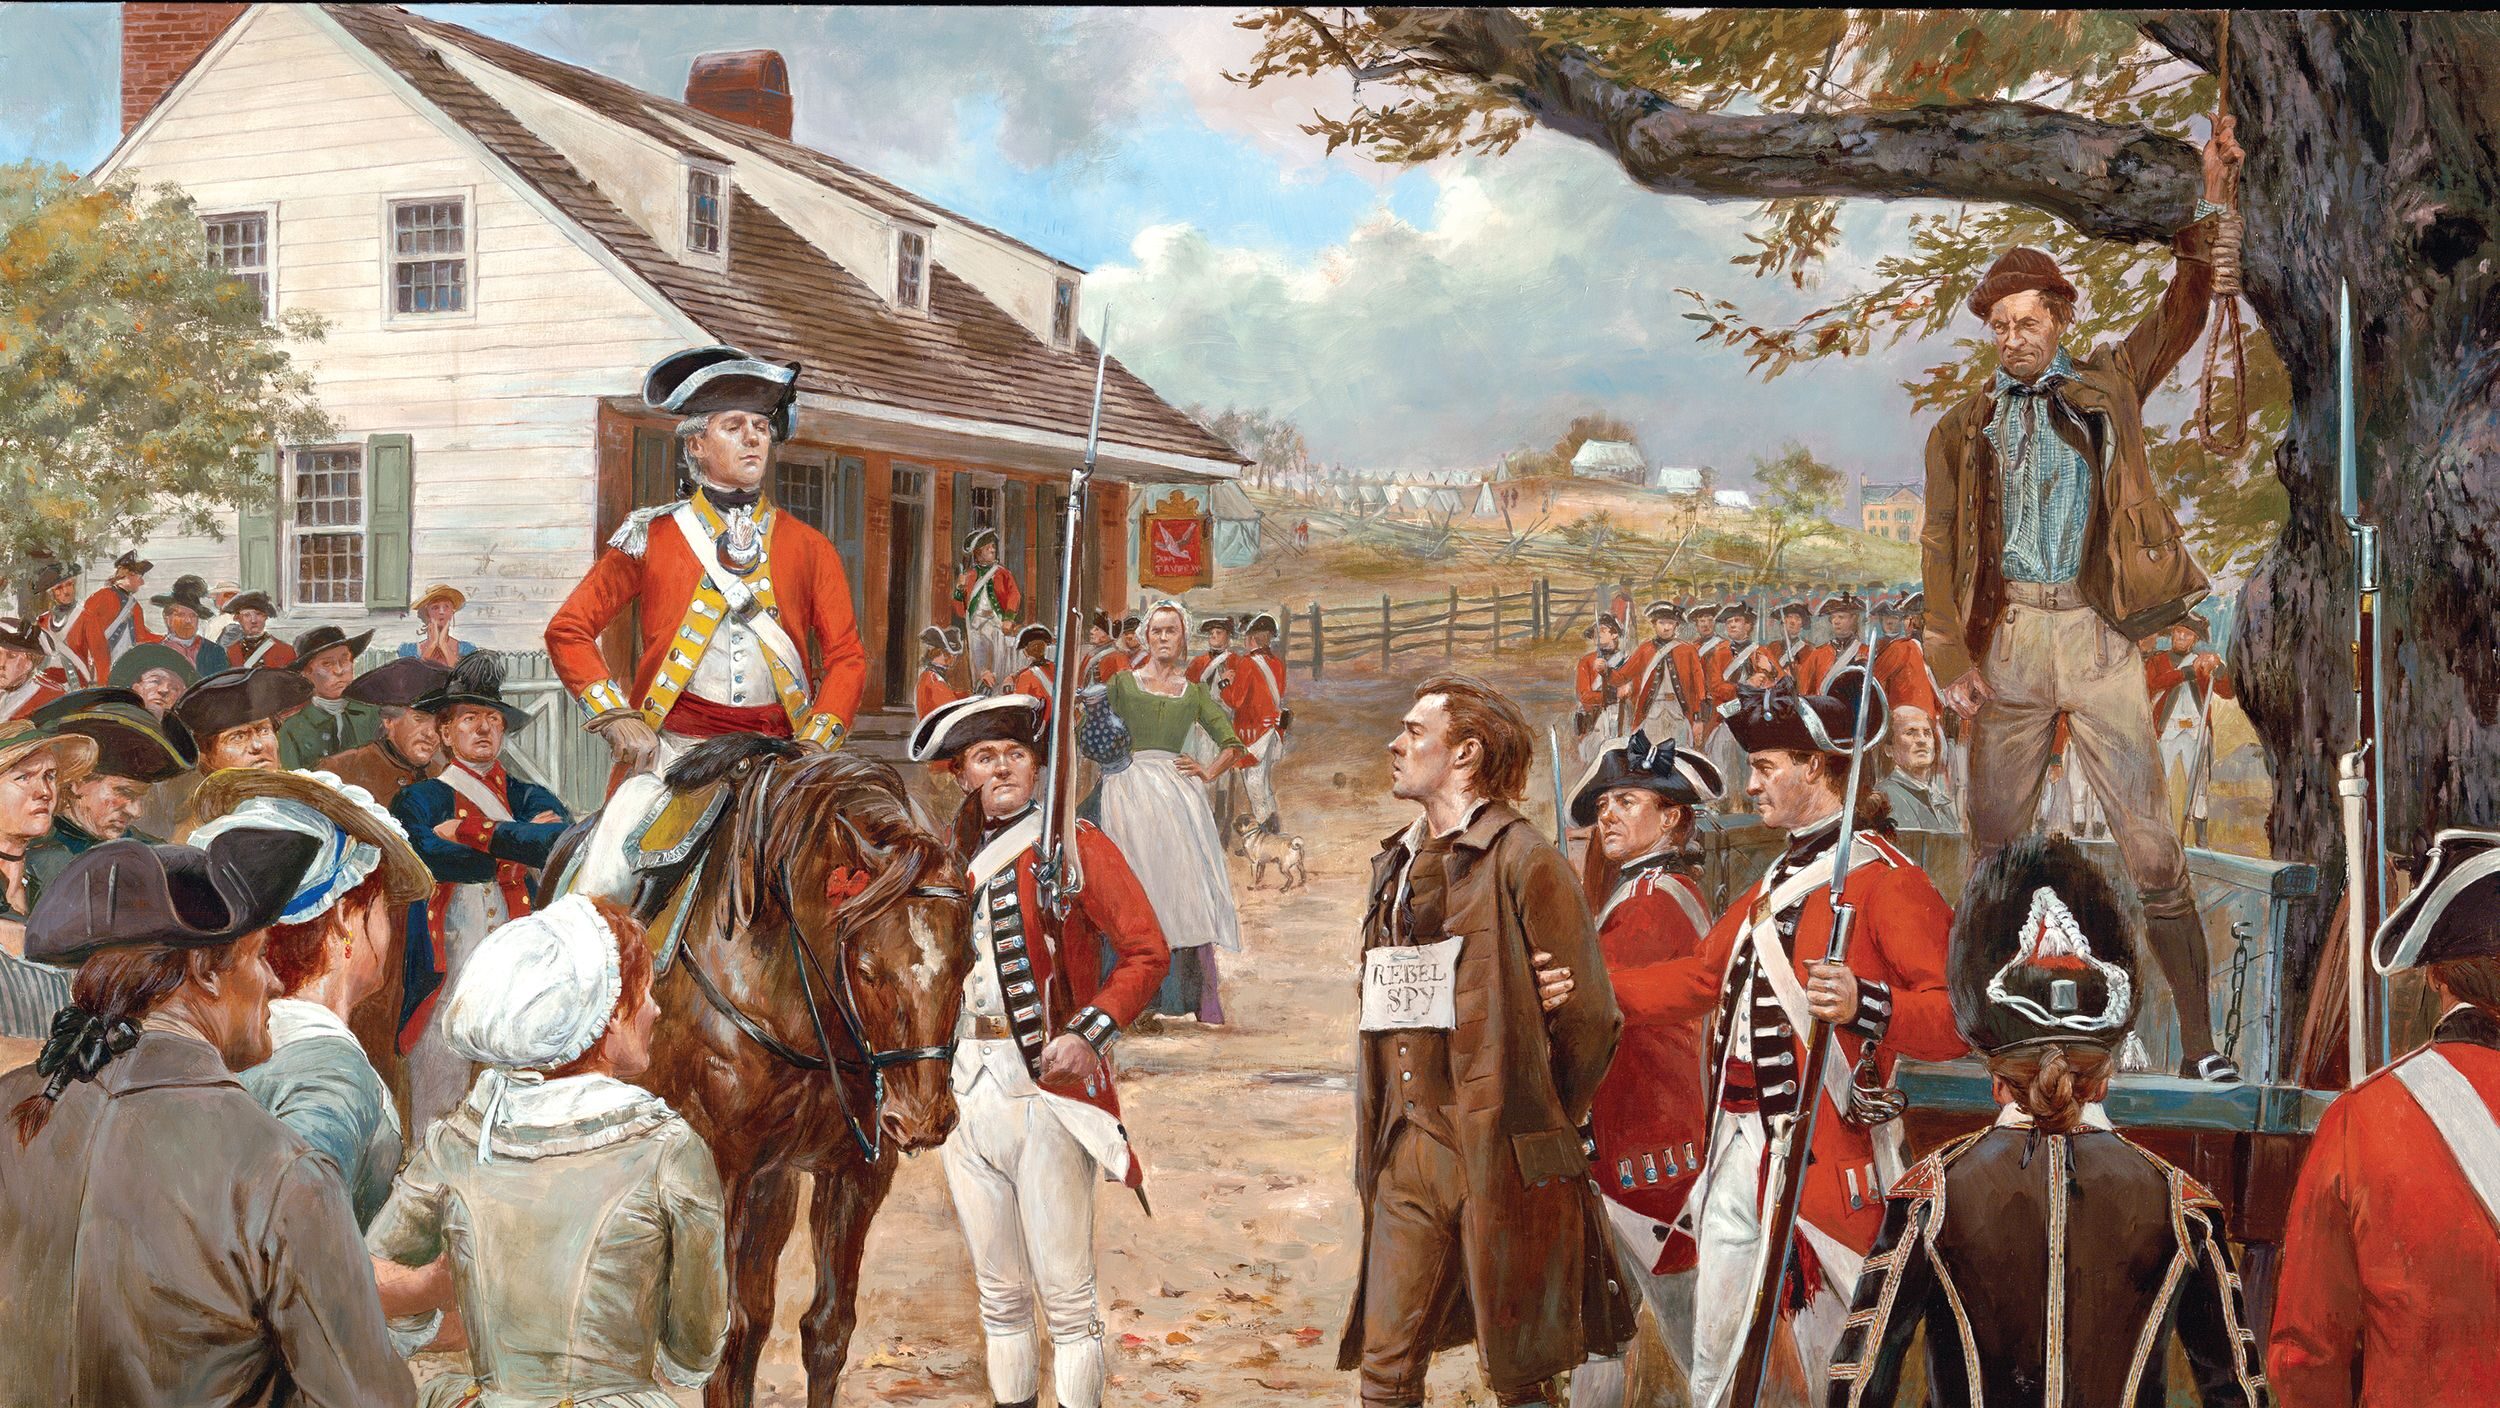 “The Hanging of Nathan Hale , New York 1776” by Don Troiani.